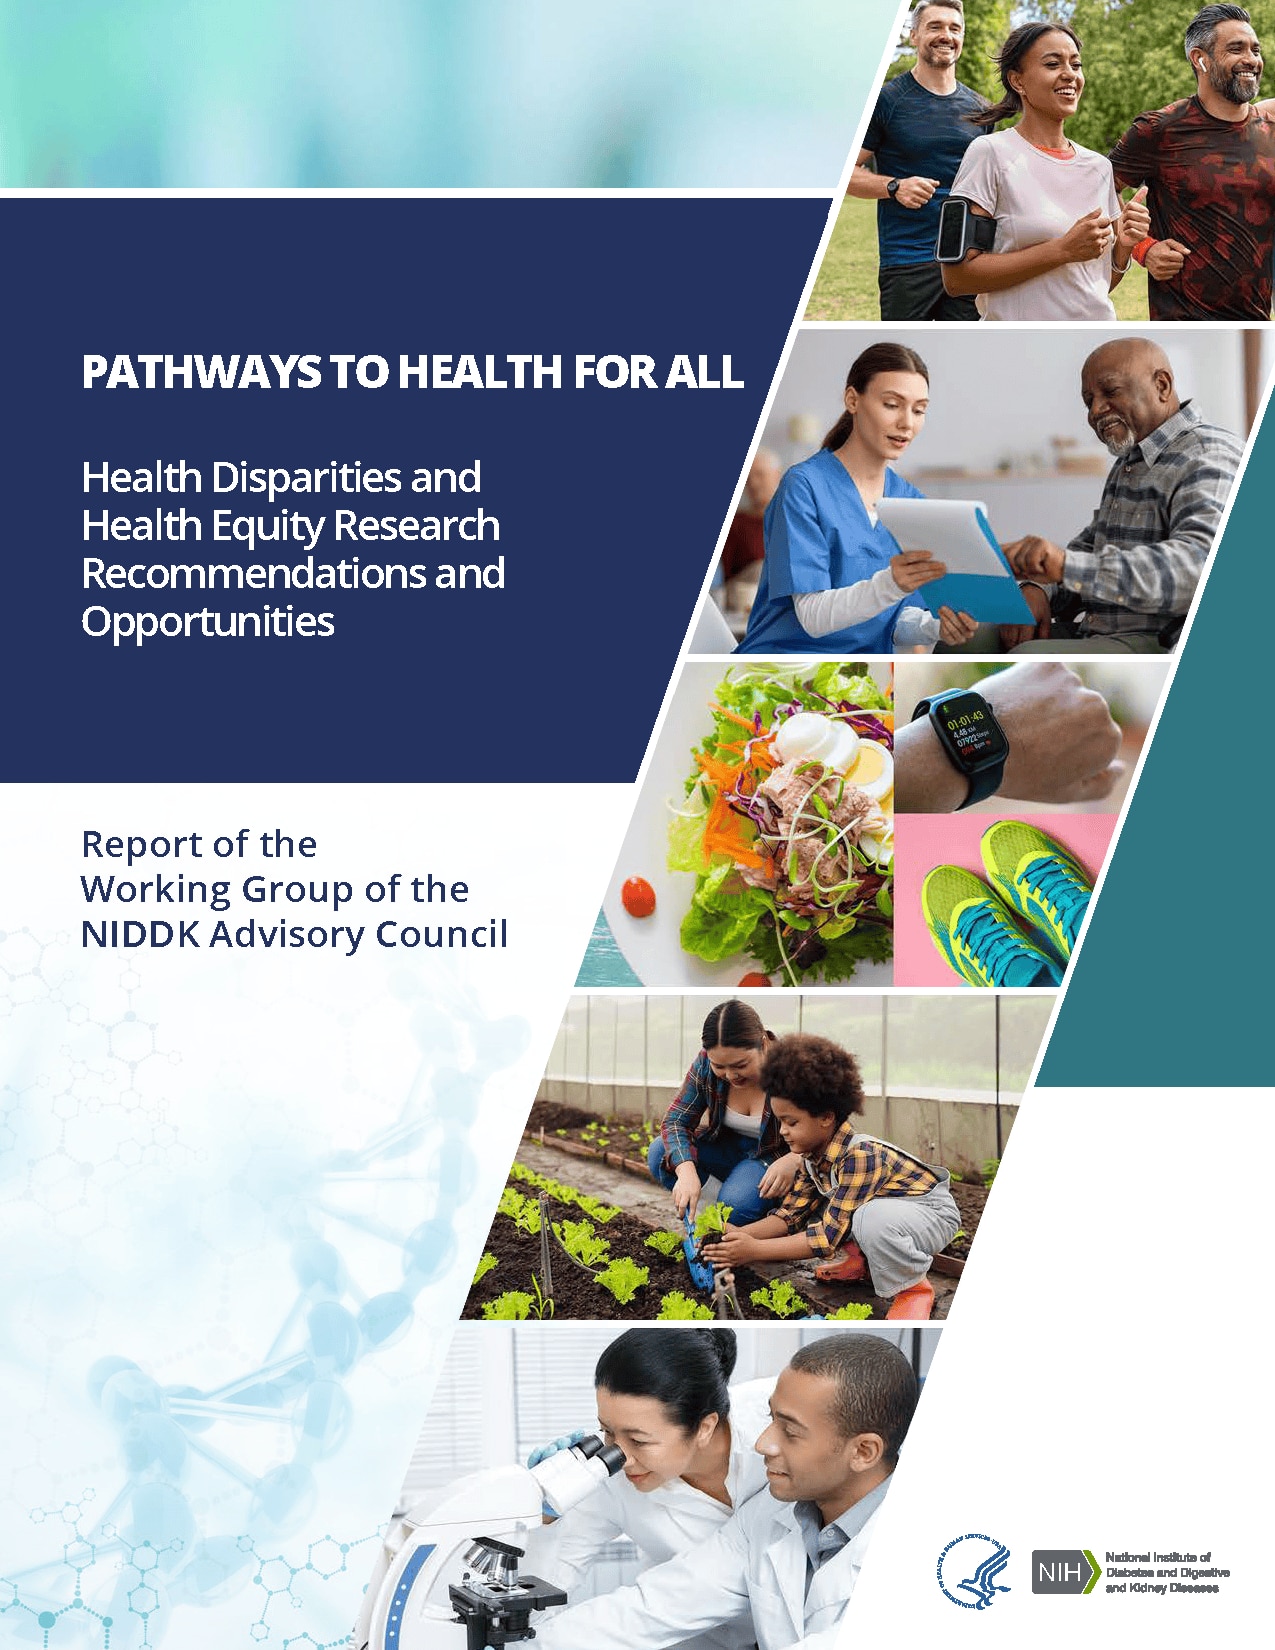 Pathways to Health for All, Disparities and Equity Research Recommendations and Opportunities, Report of Working Group of NIDDK Advisory Council report cover.